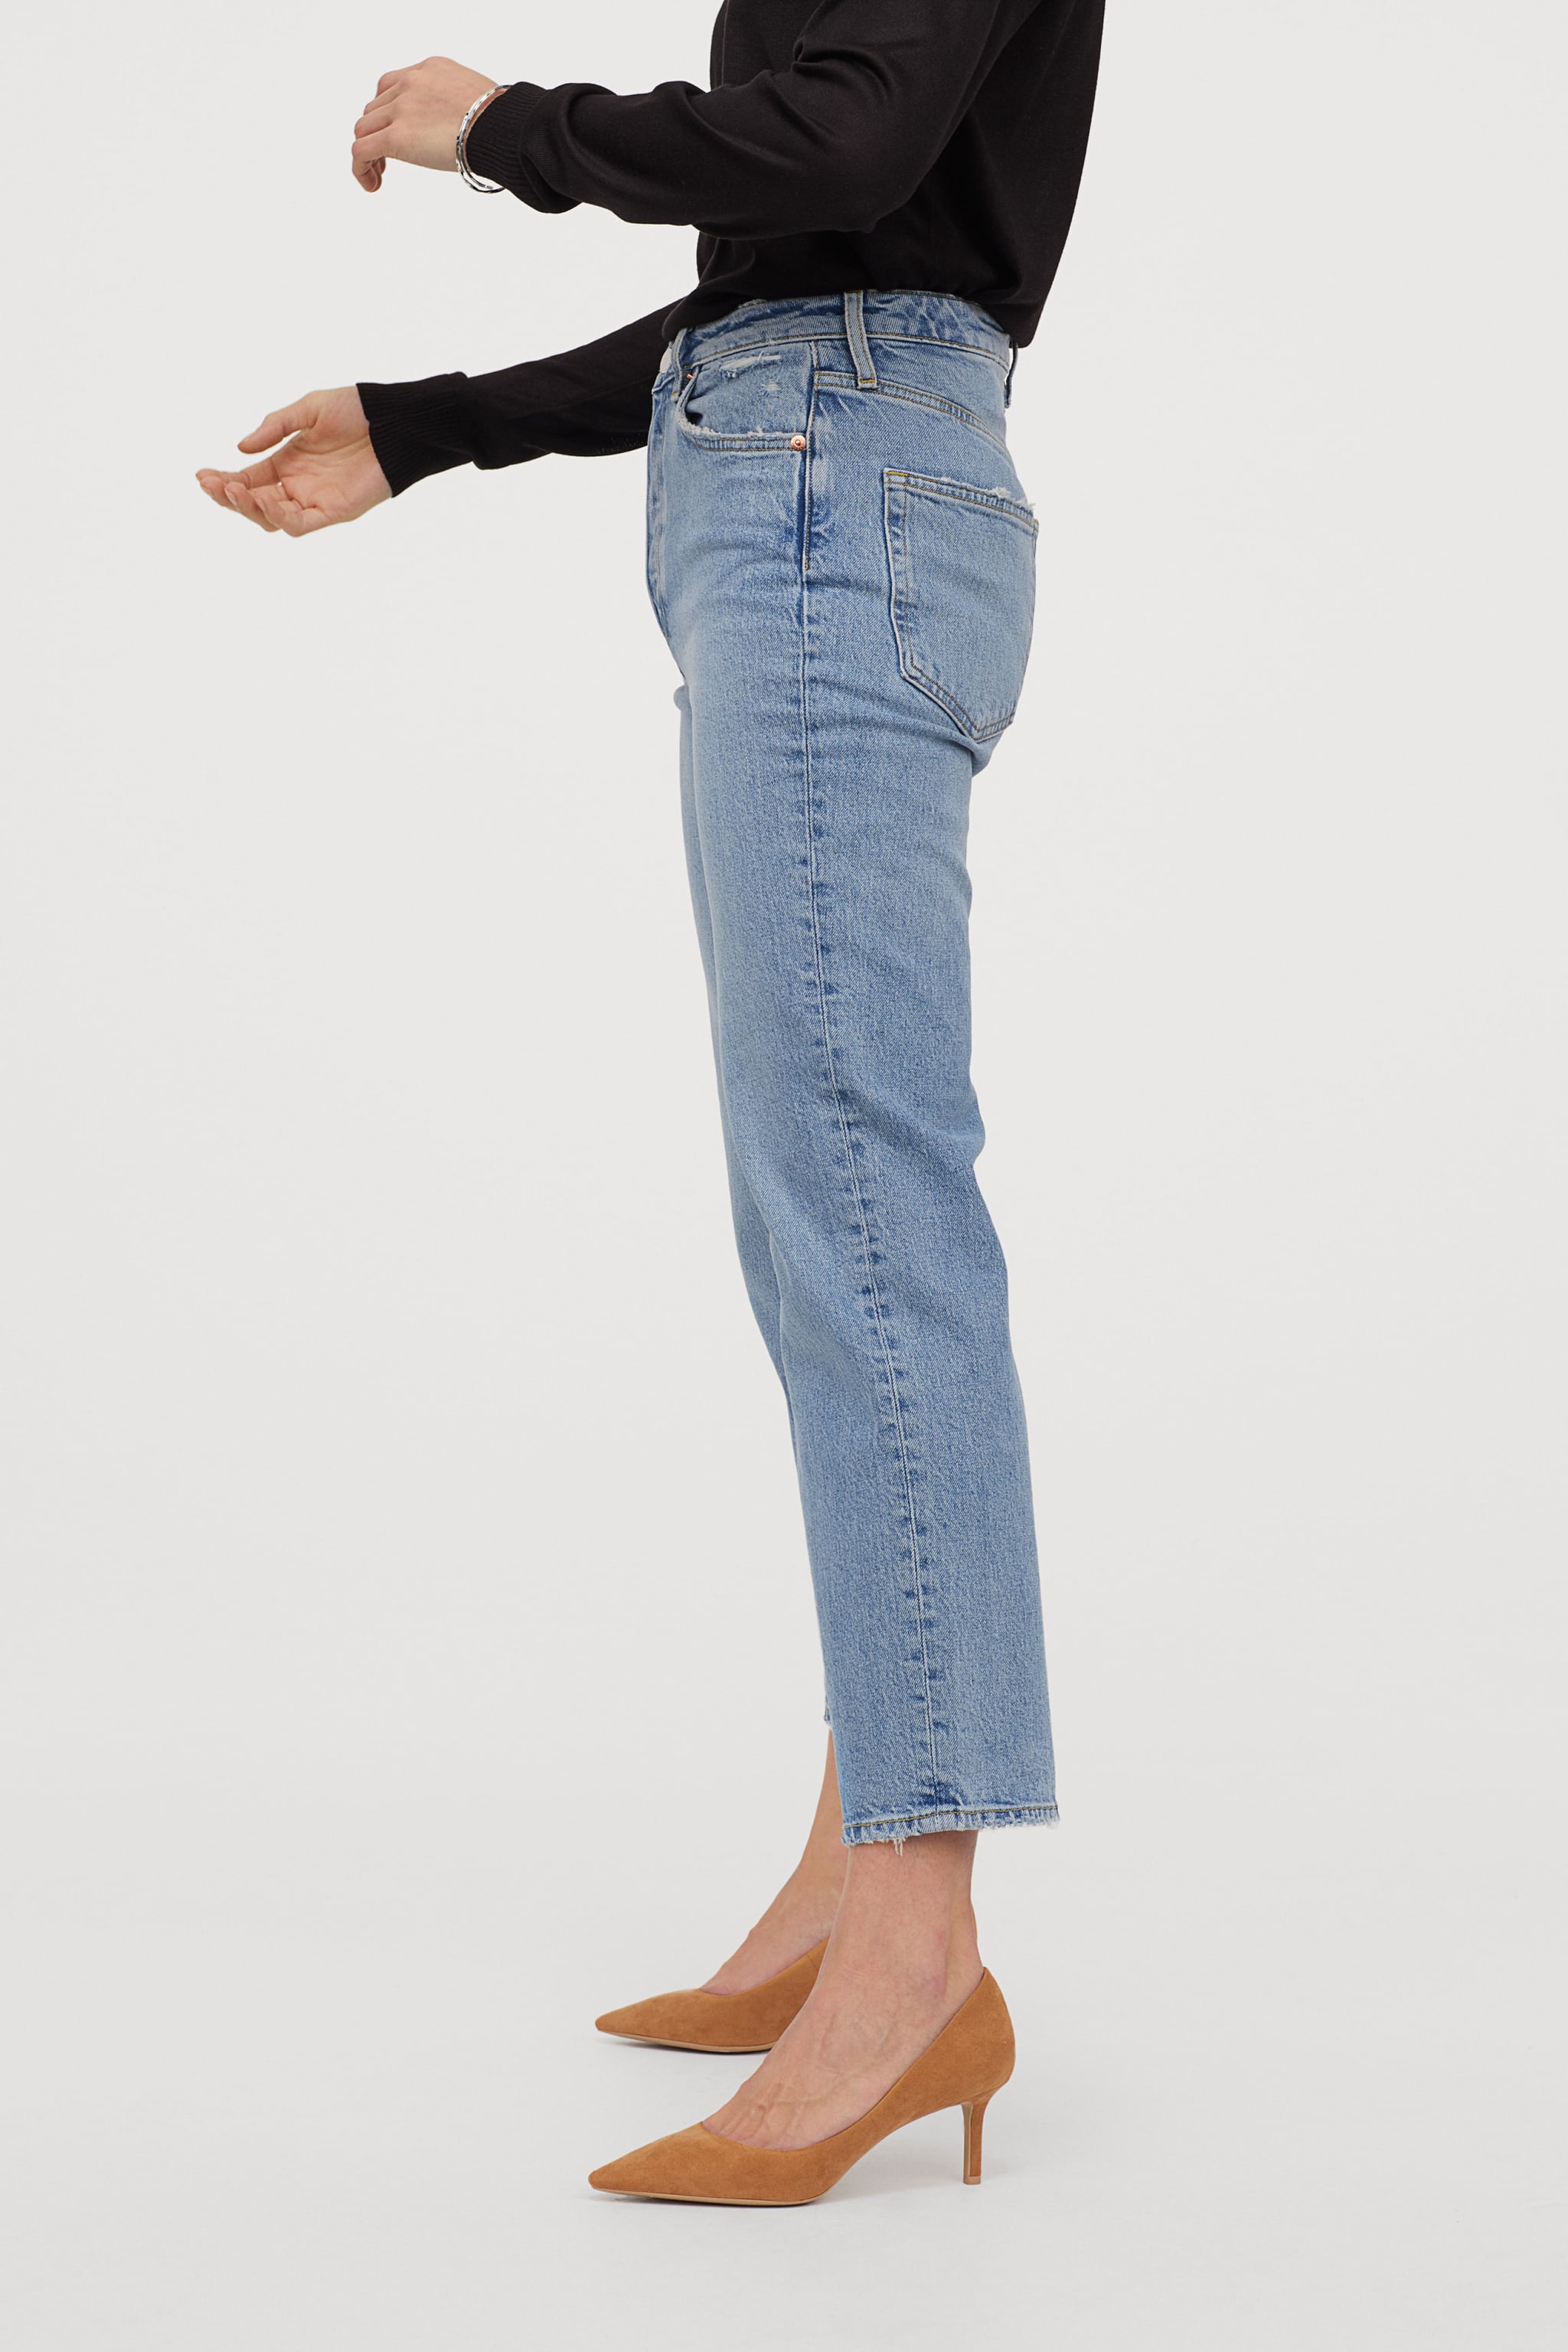 hm straight high ankle jeans